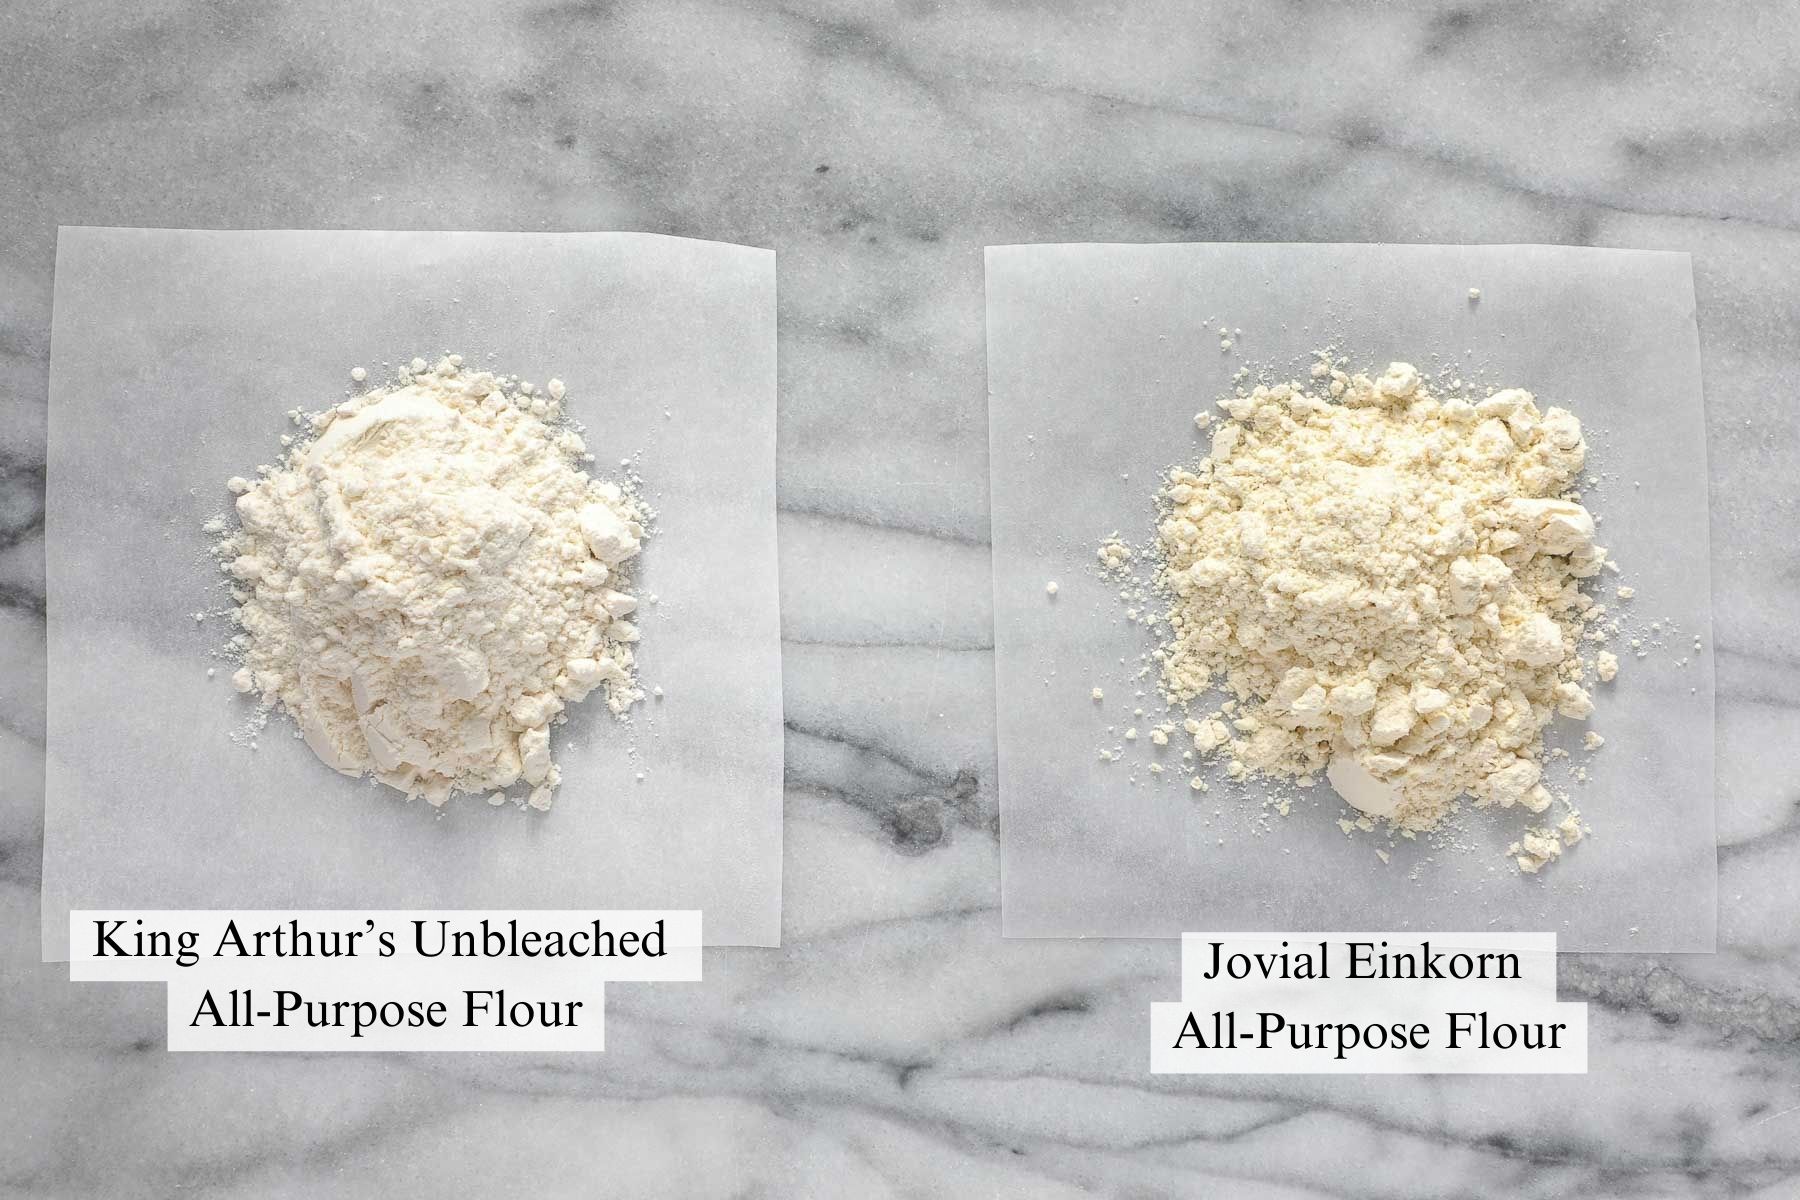 A small amount of King Arthur all-purpose unbleached flour compared with a small amount of Jovial Einkorn all-purpose flour on a light background.